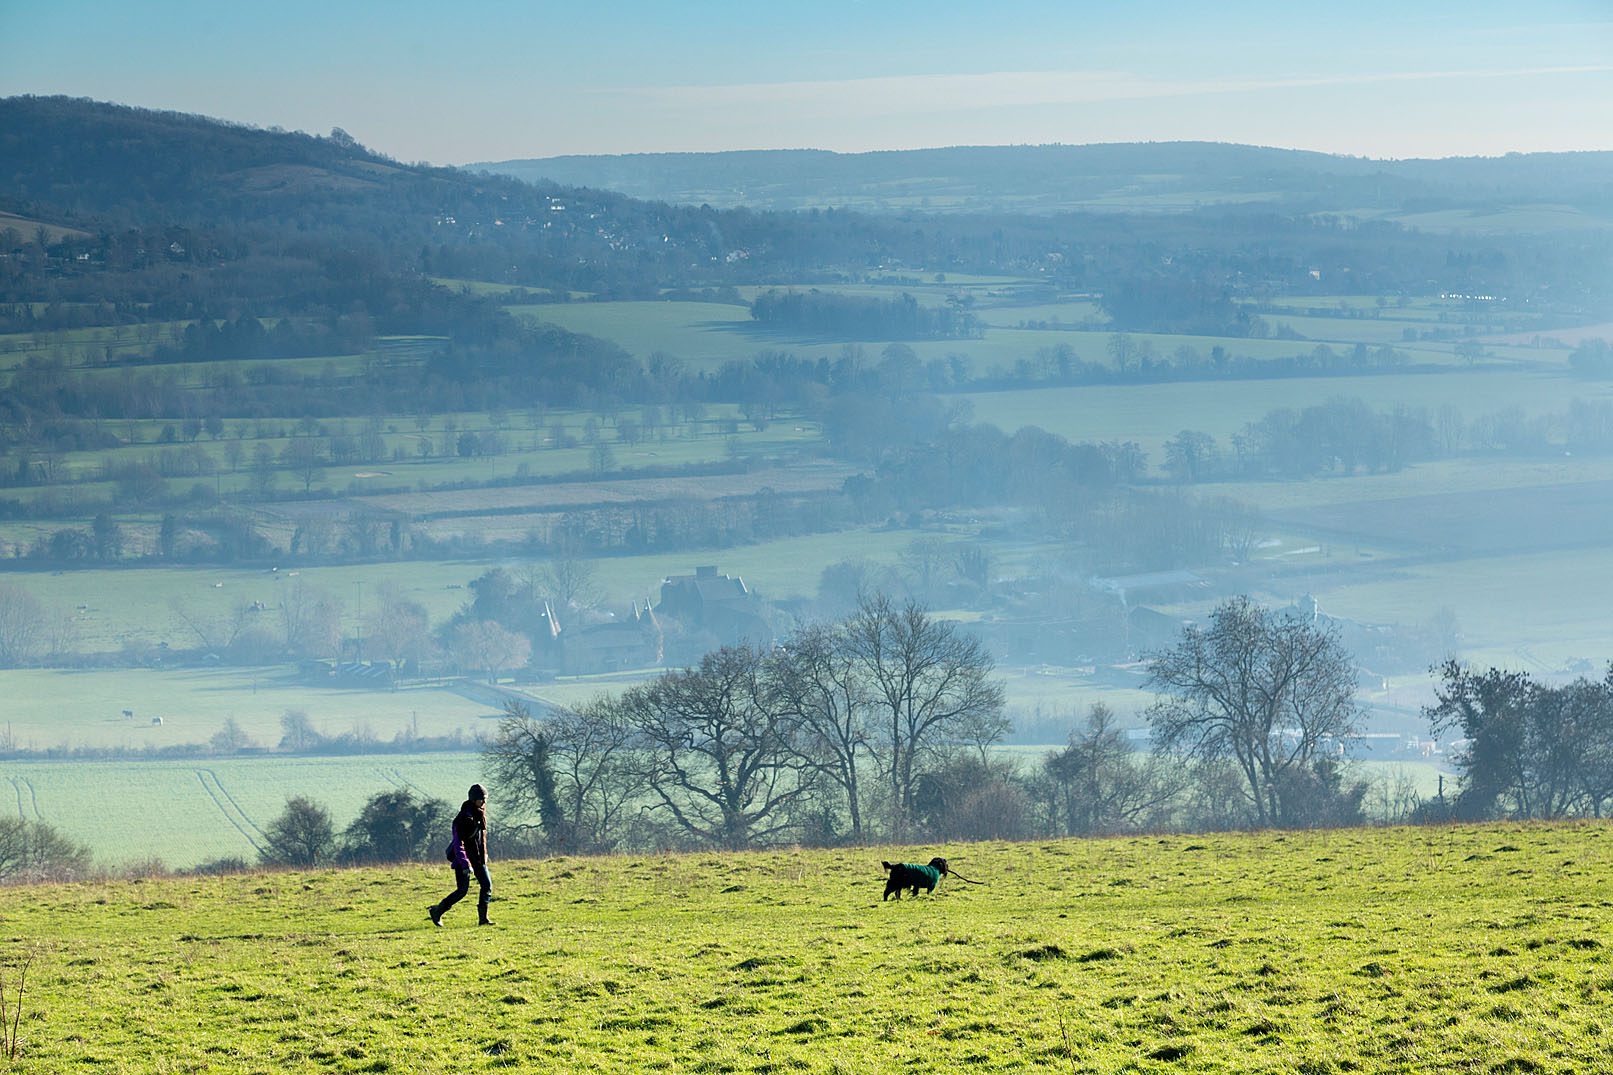 Walker with dog on grass fields, with misty view of fields and trees. Dog has a stick and is off-lead.